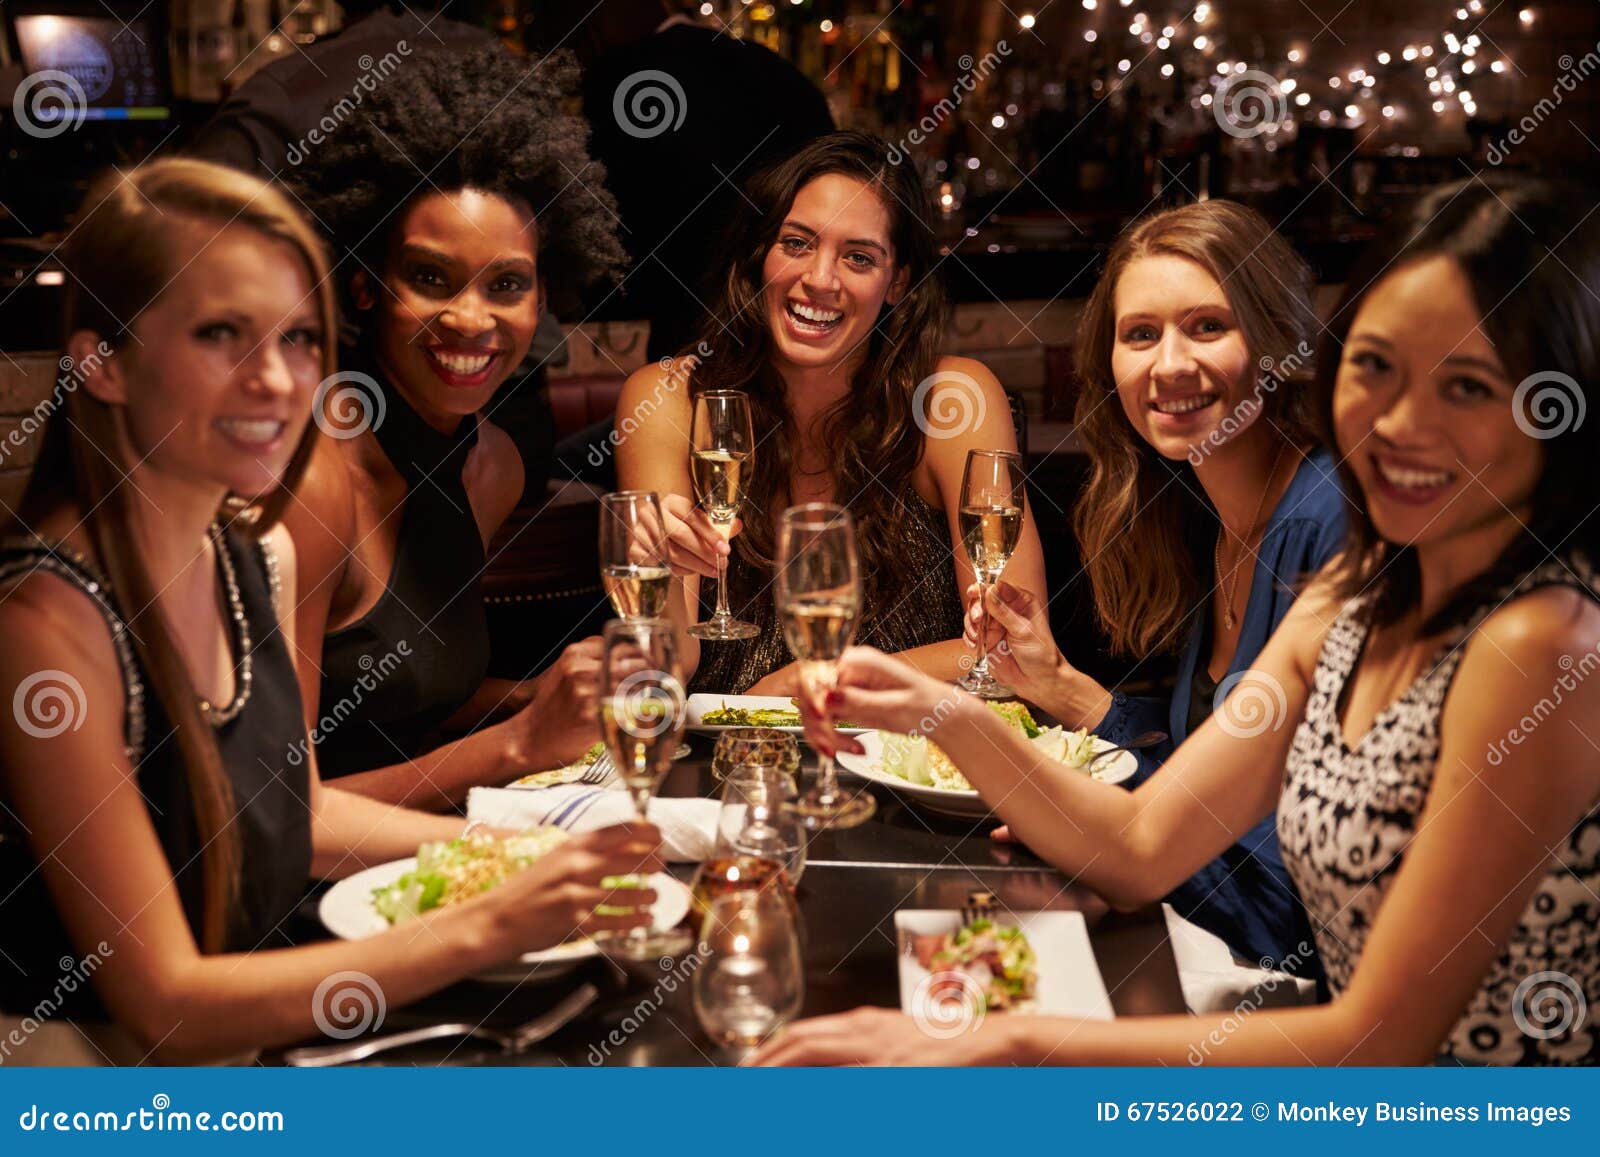 Group of Female Friends Enjoying Meal in Restaurant Stock Photo - Image